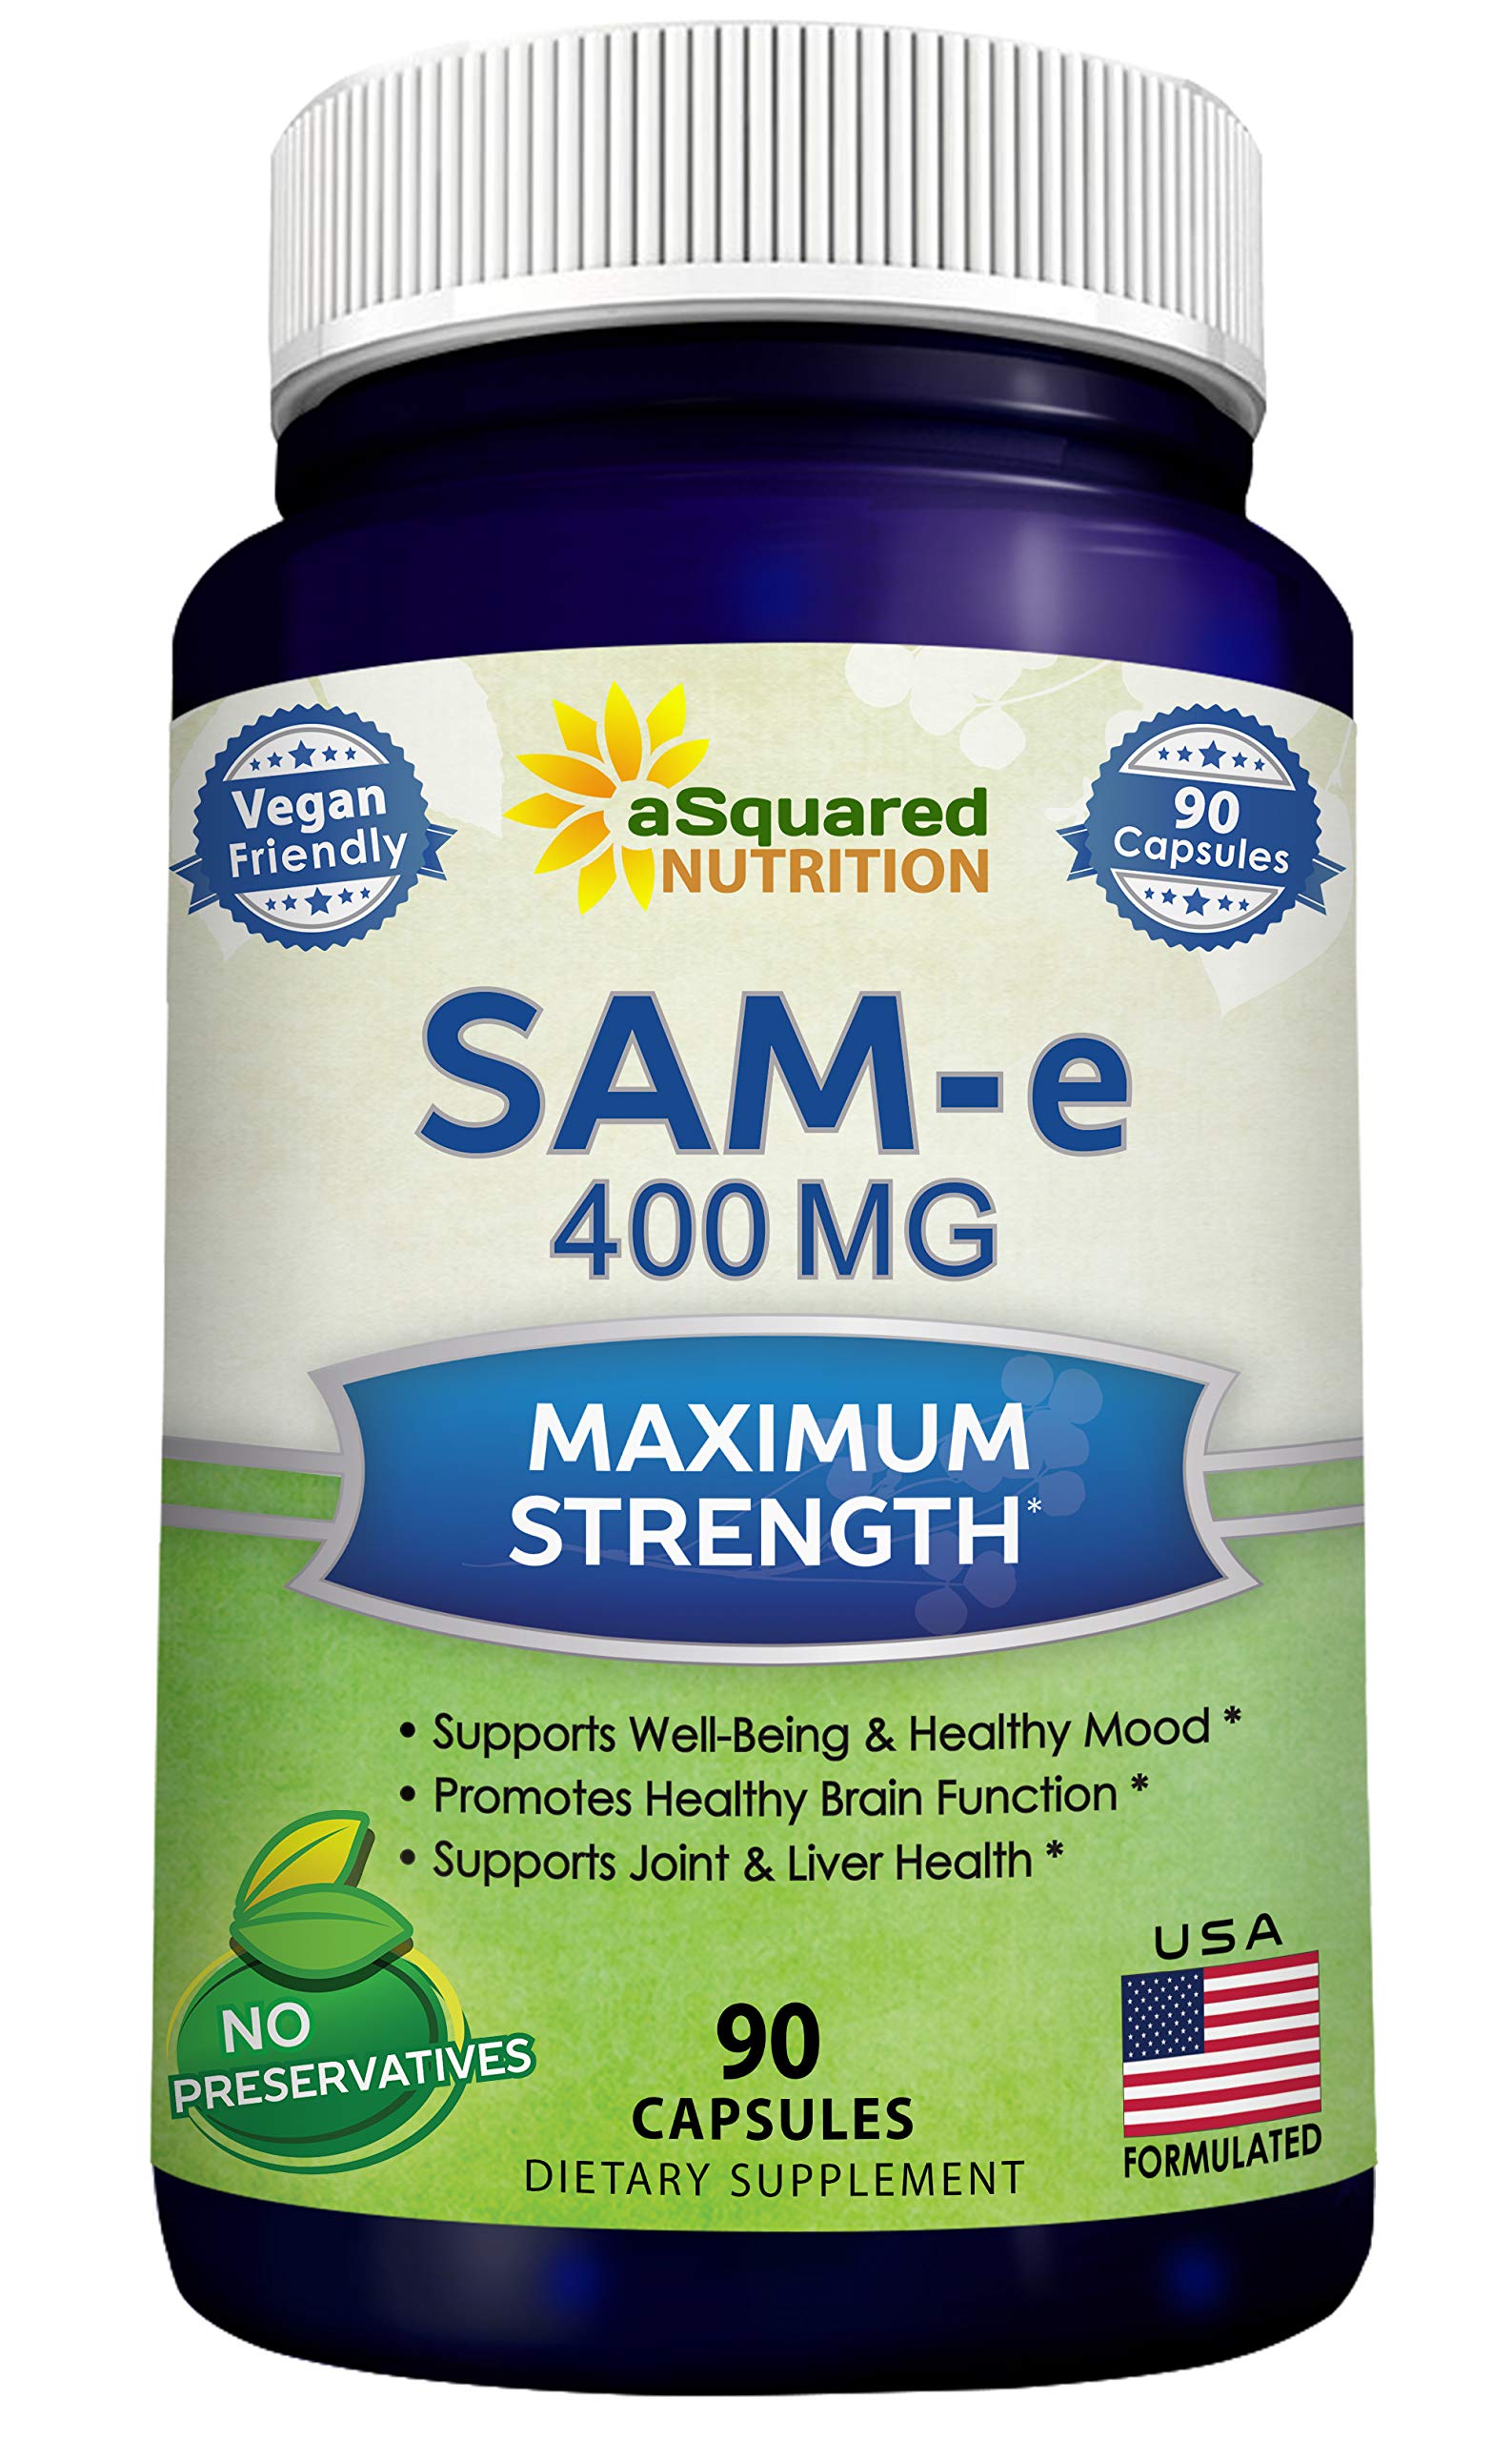 SAM-e 400mg Supplement - 90 Capsules - Same (S-Adenosyl Methionine) to Support Mood, Joint Health, and Brain Function - Extra Strength Vegan SAM e ...